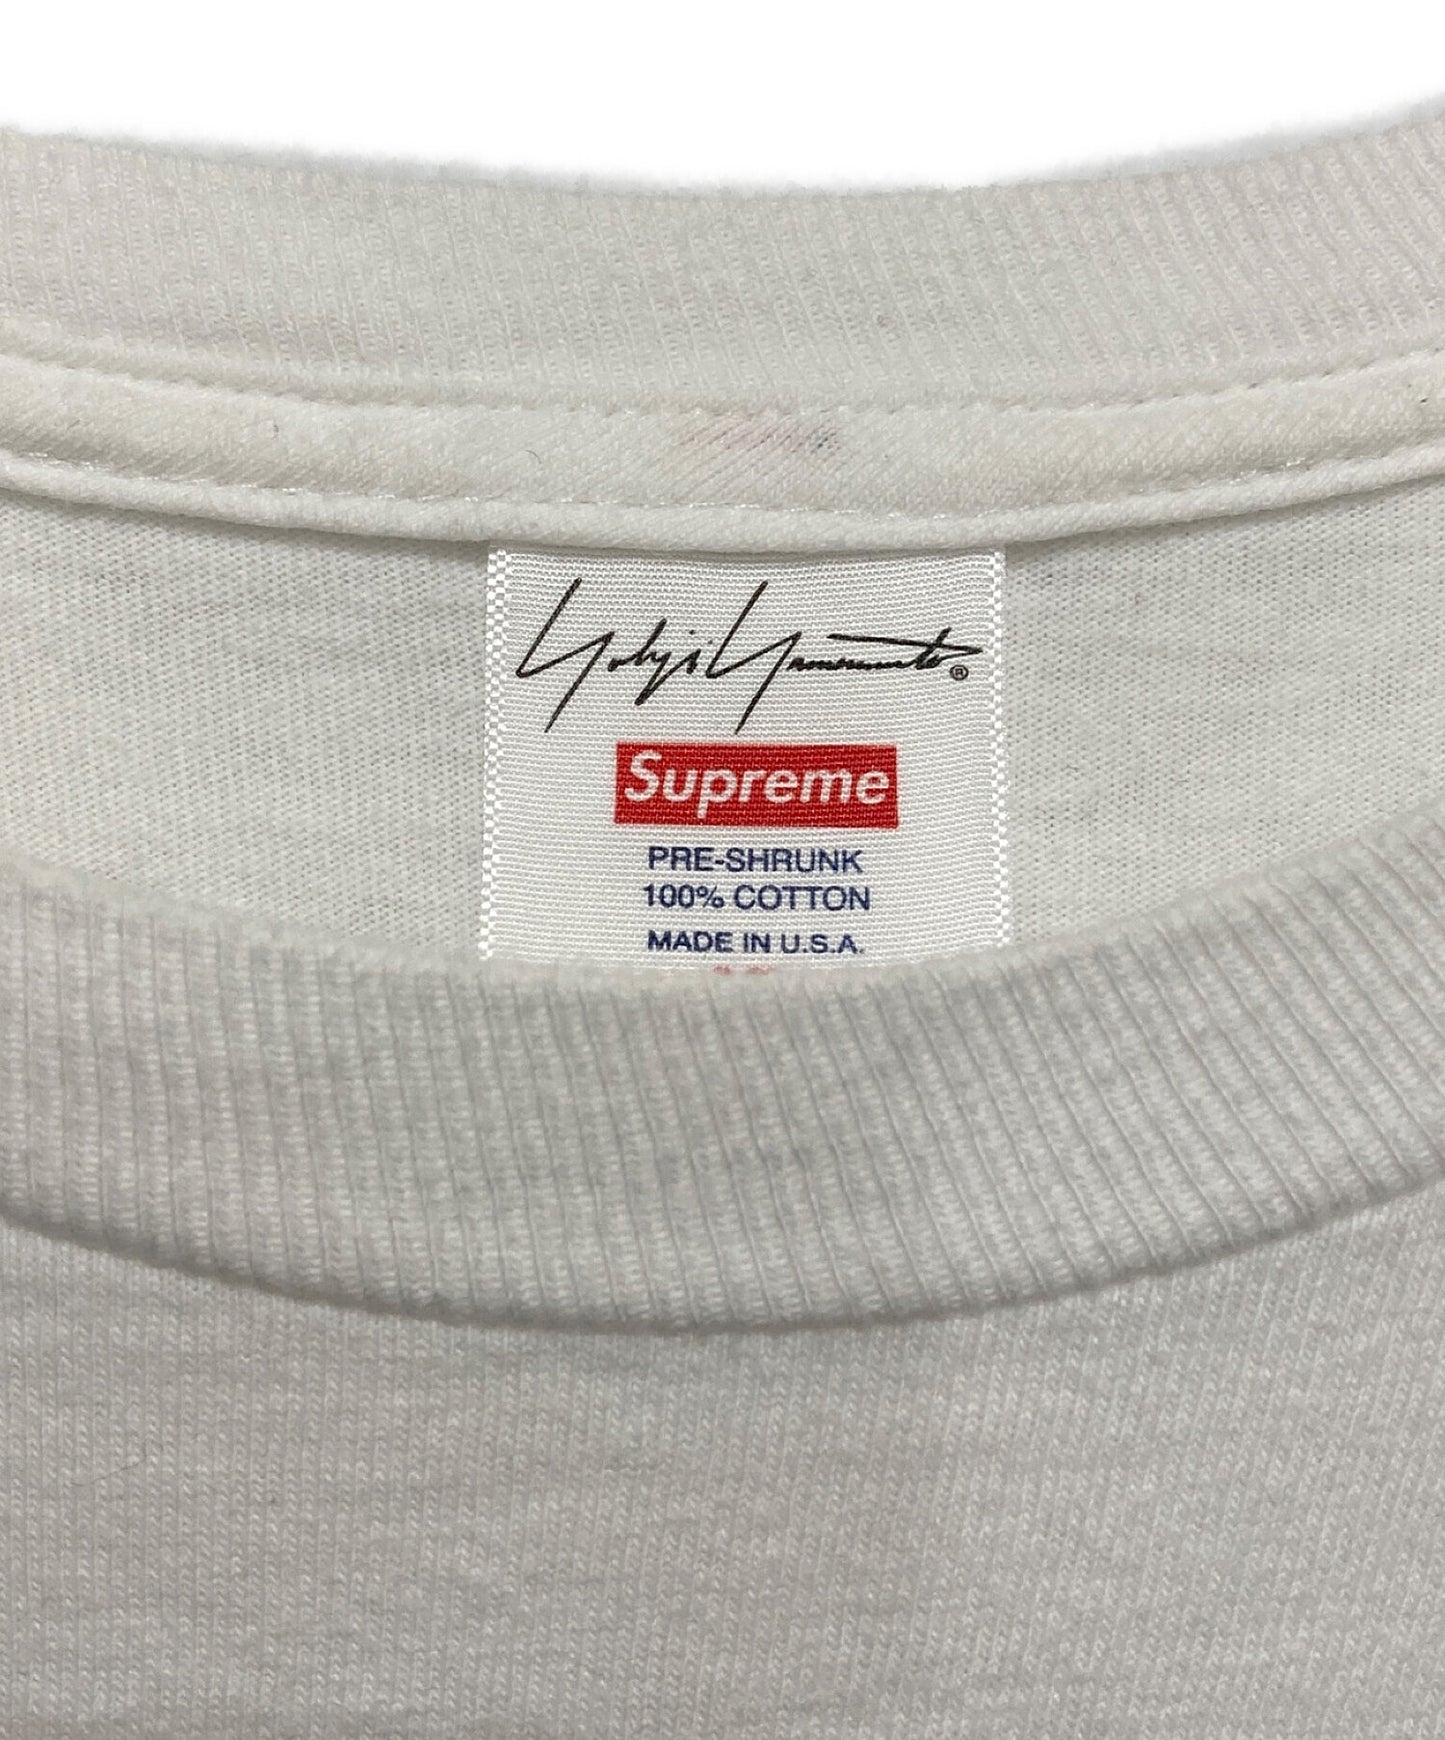 [Pre-owned] Supreme game over T-shirt